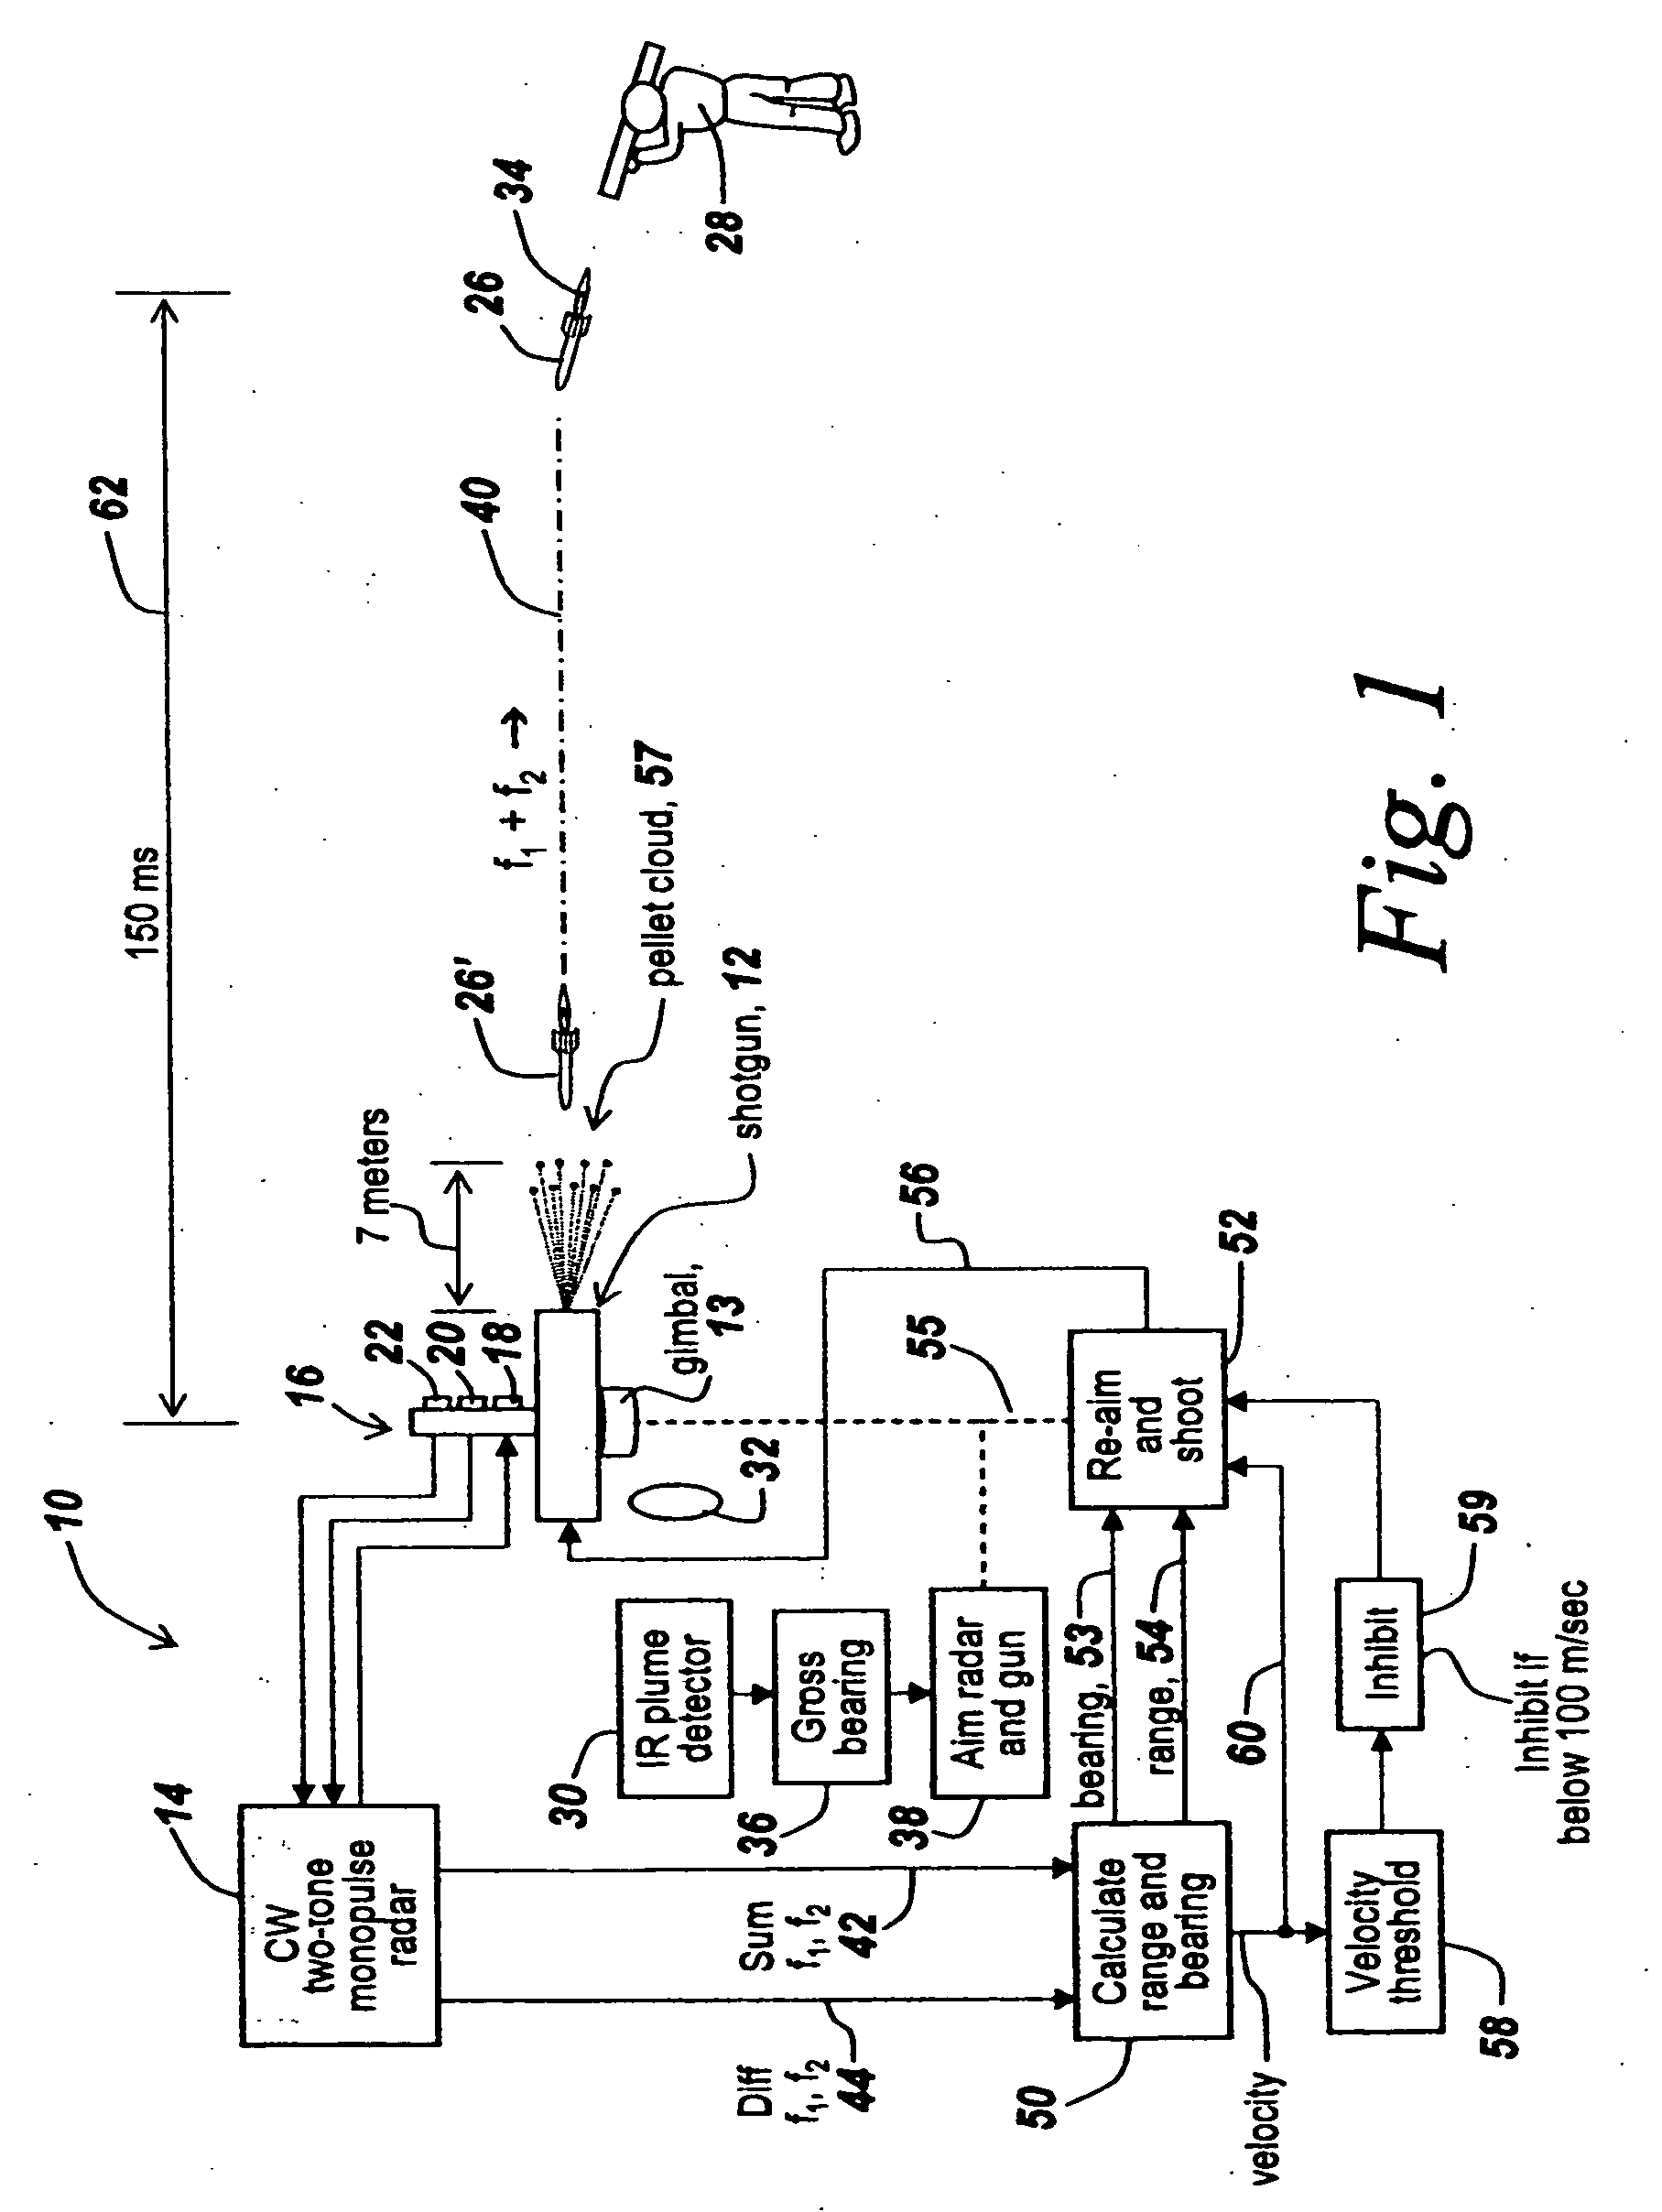 Method and apparatus for improved determination of range and angle of arrival utilizing a two tone CW radar